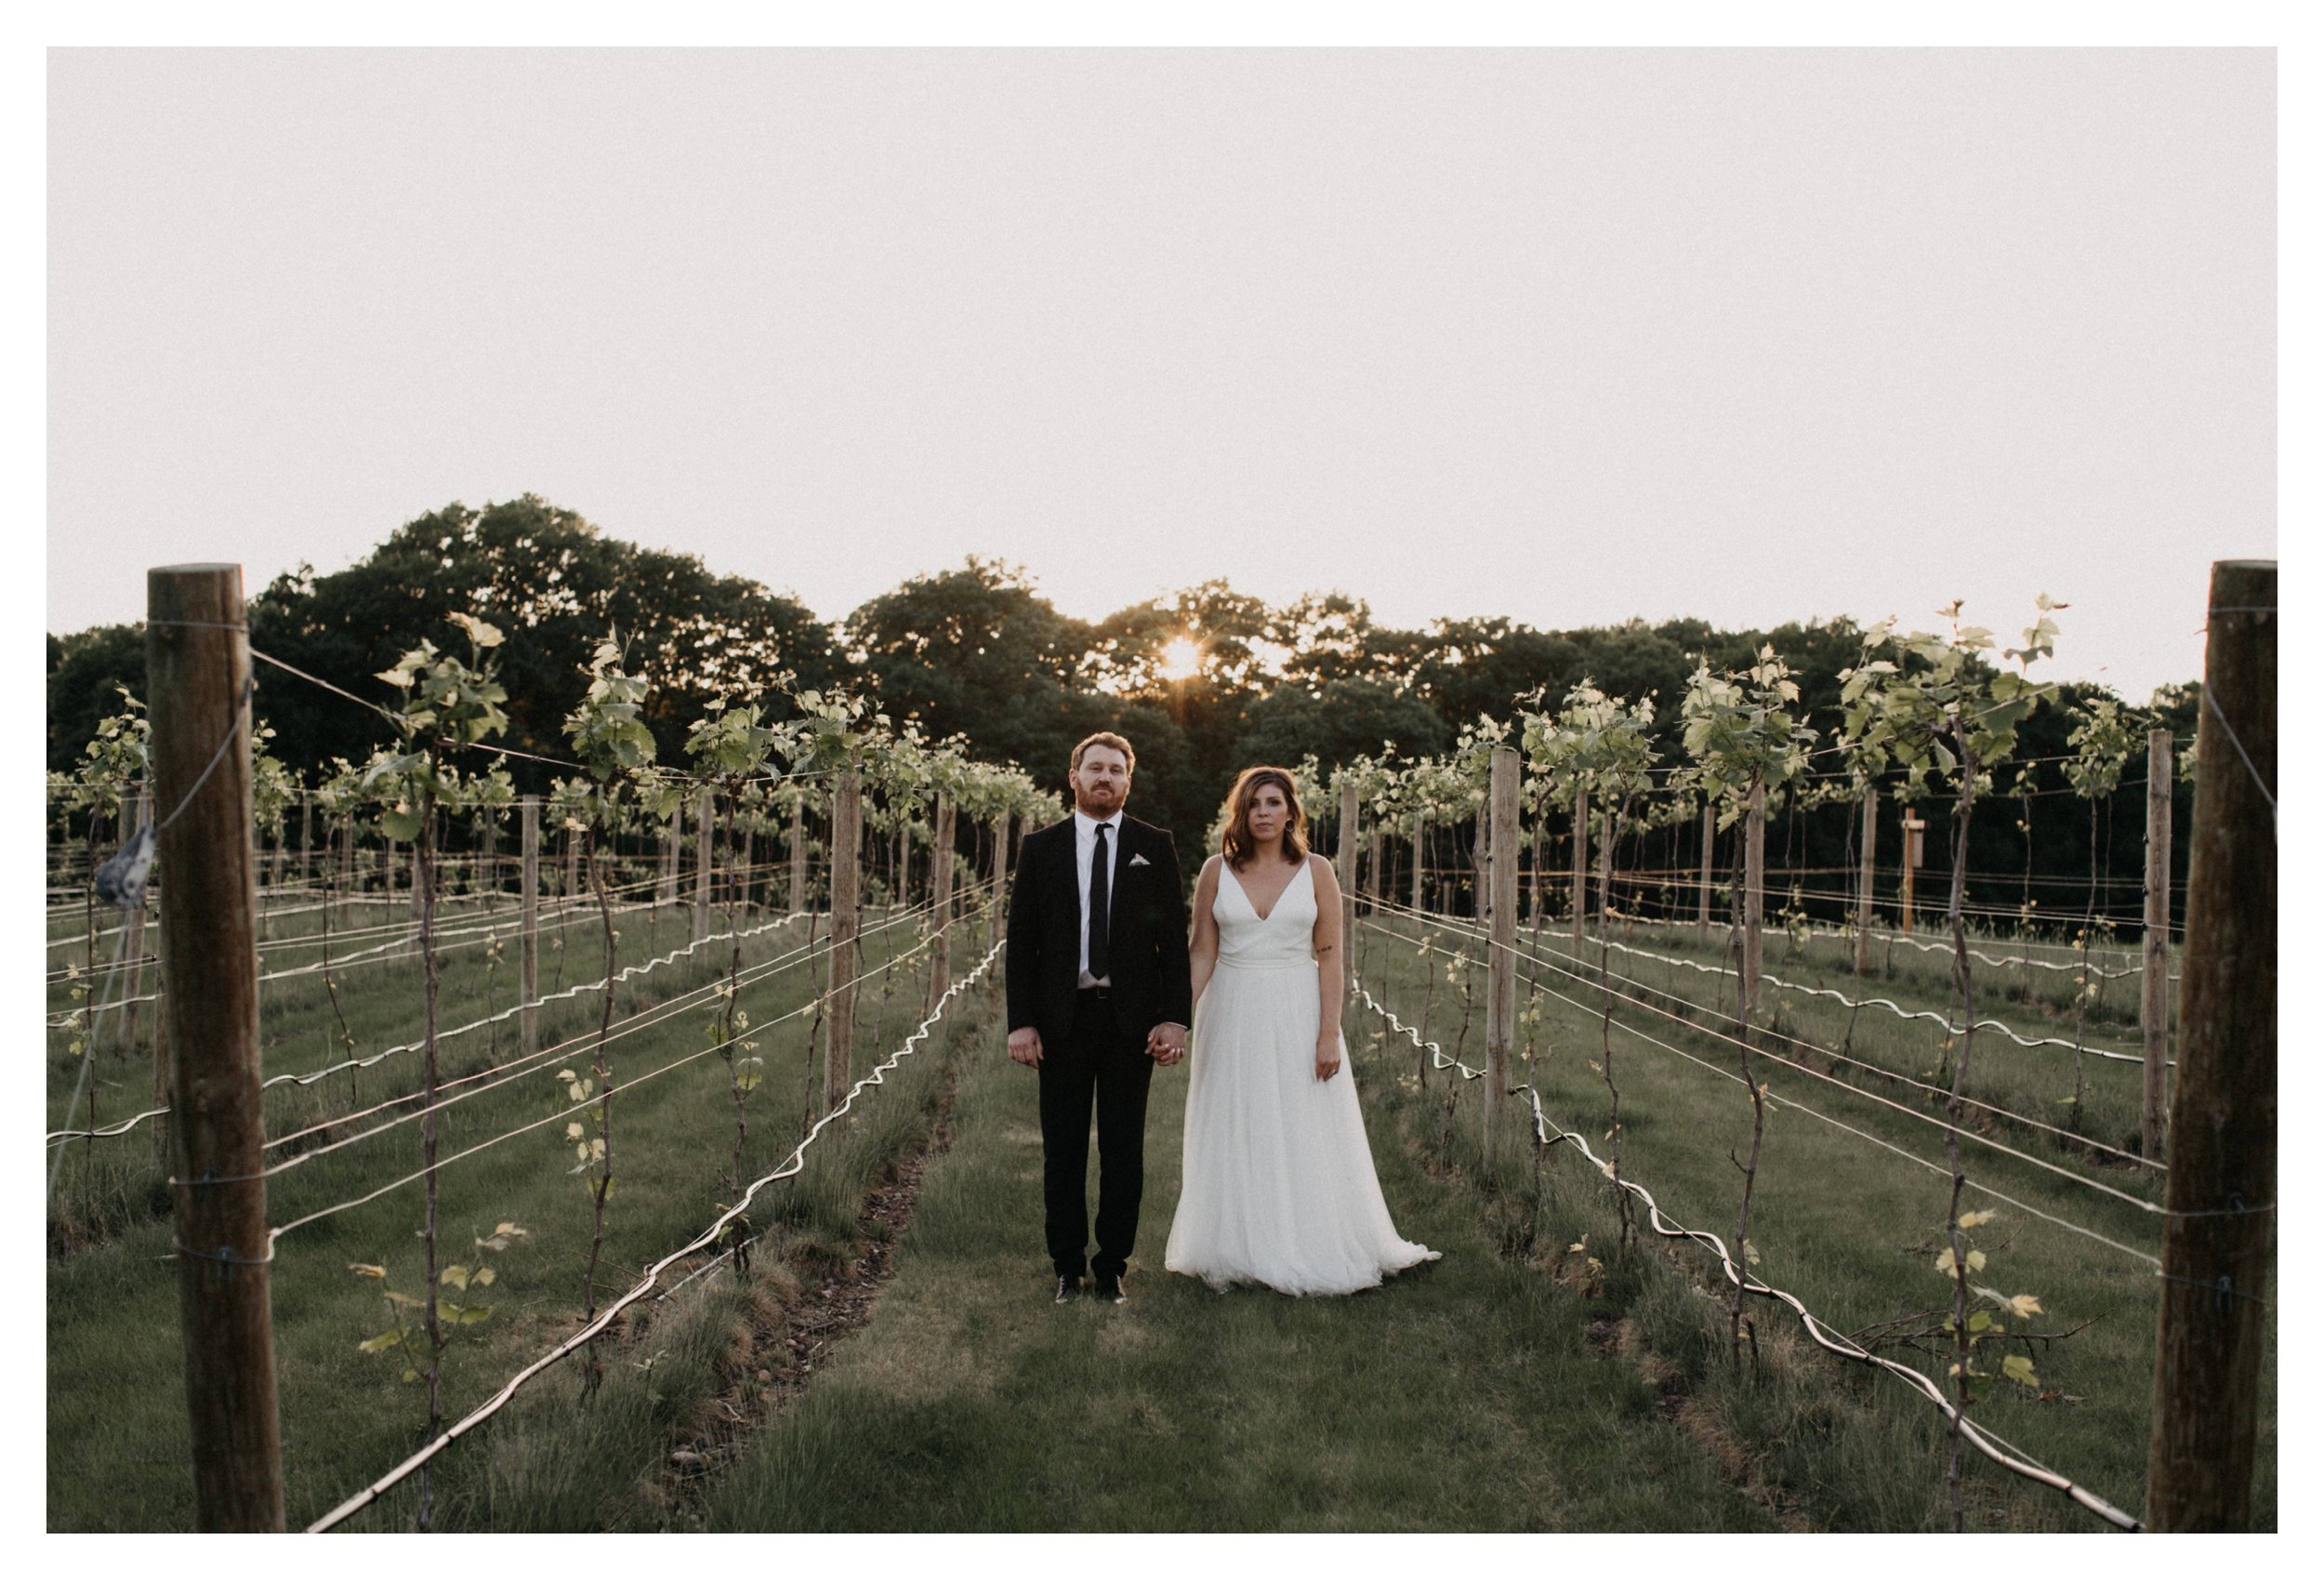 Bride and groom standing in vineyard during sunset at Minnesota winery wedding